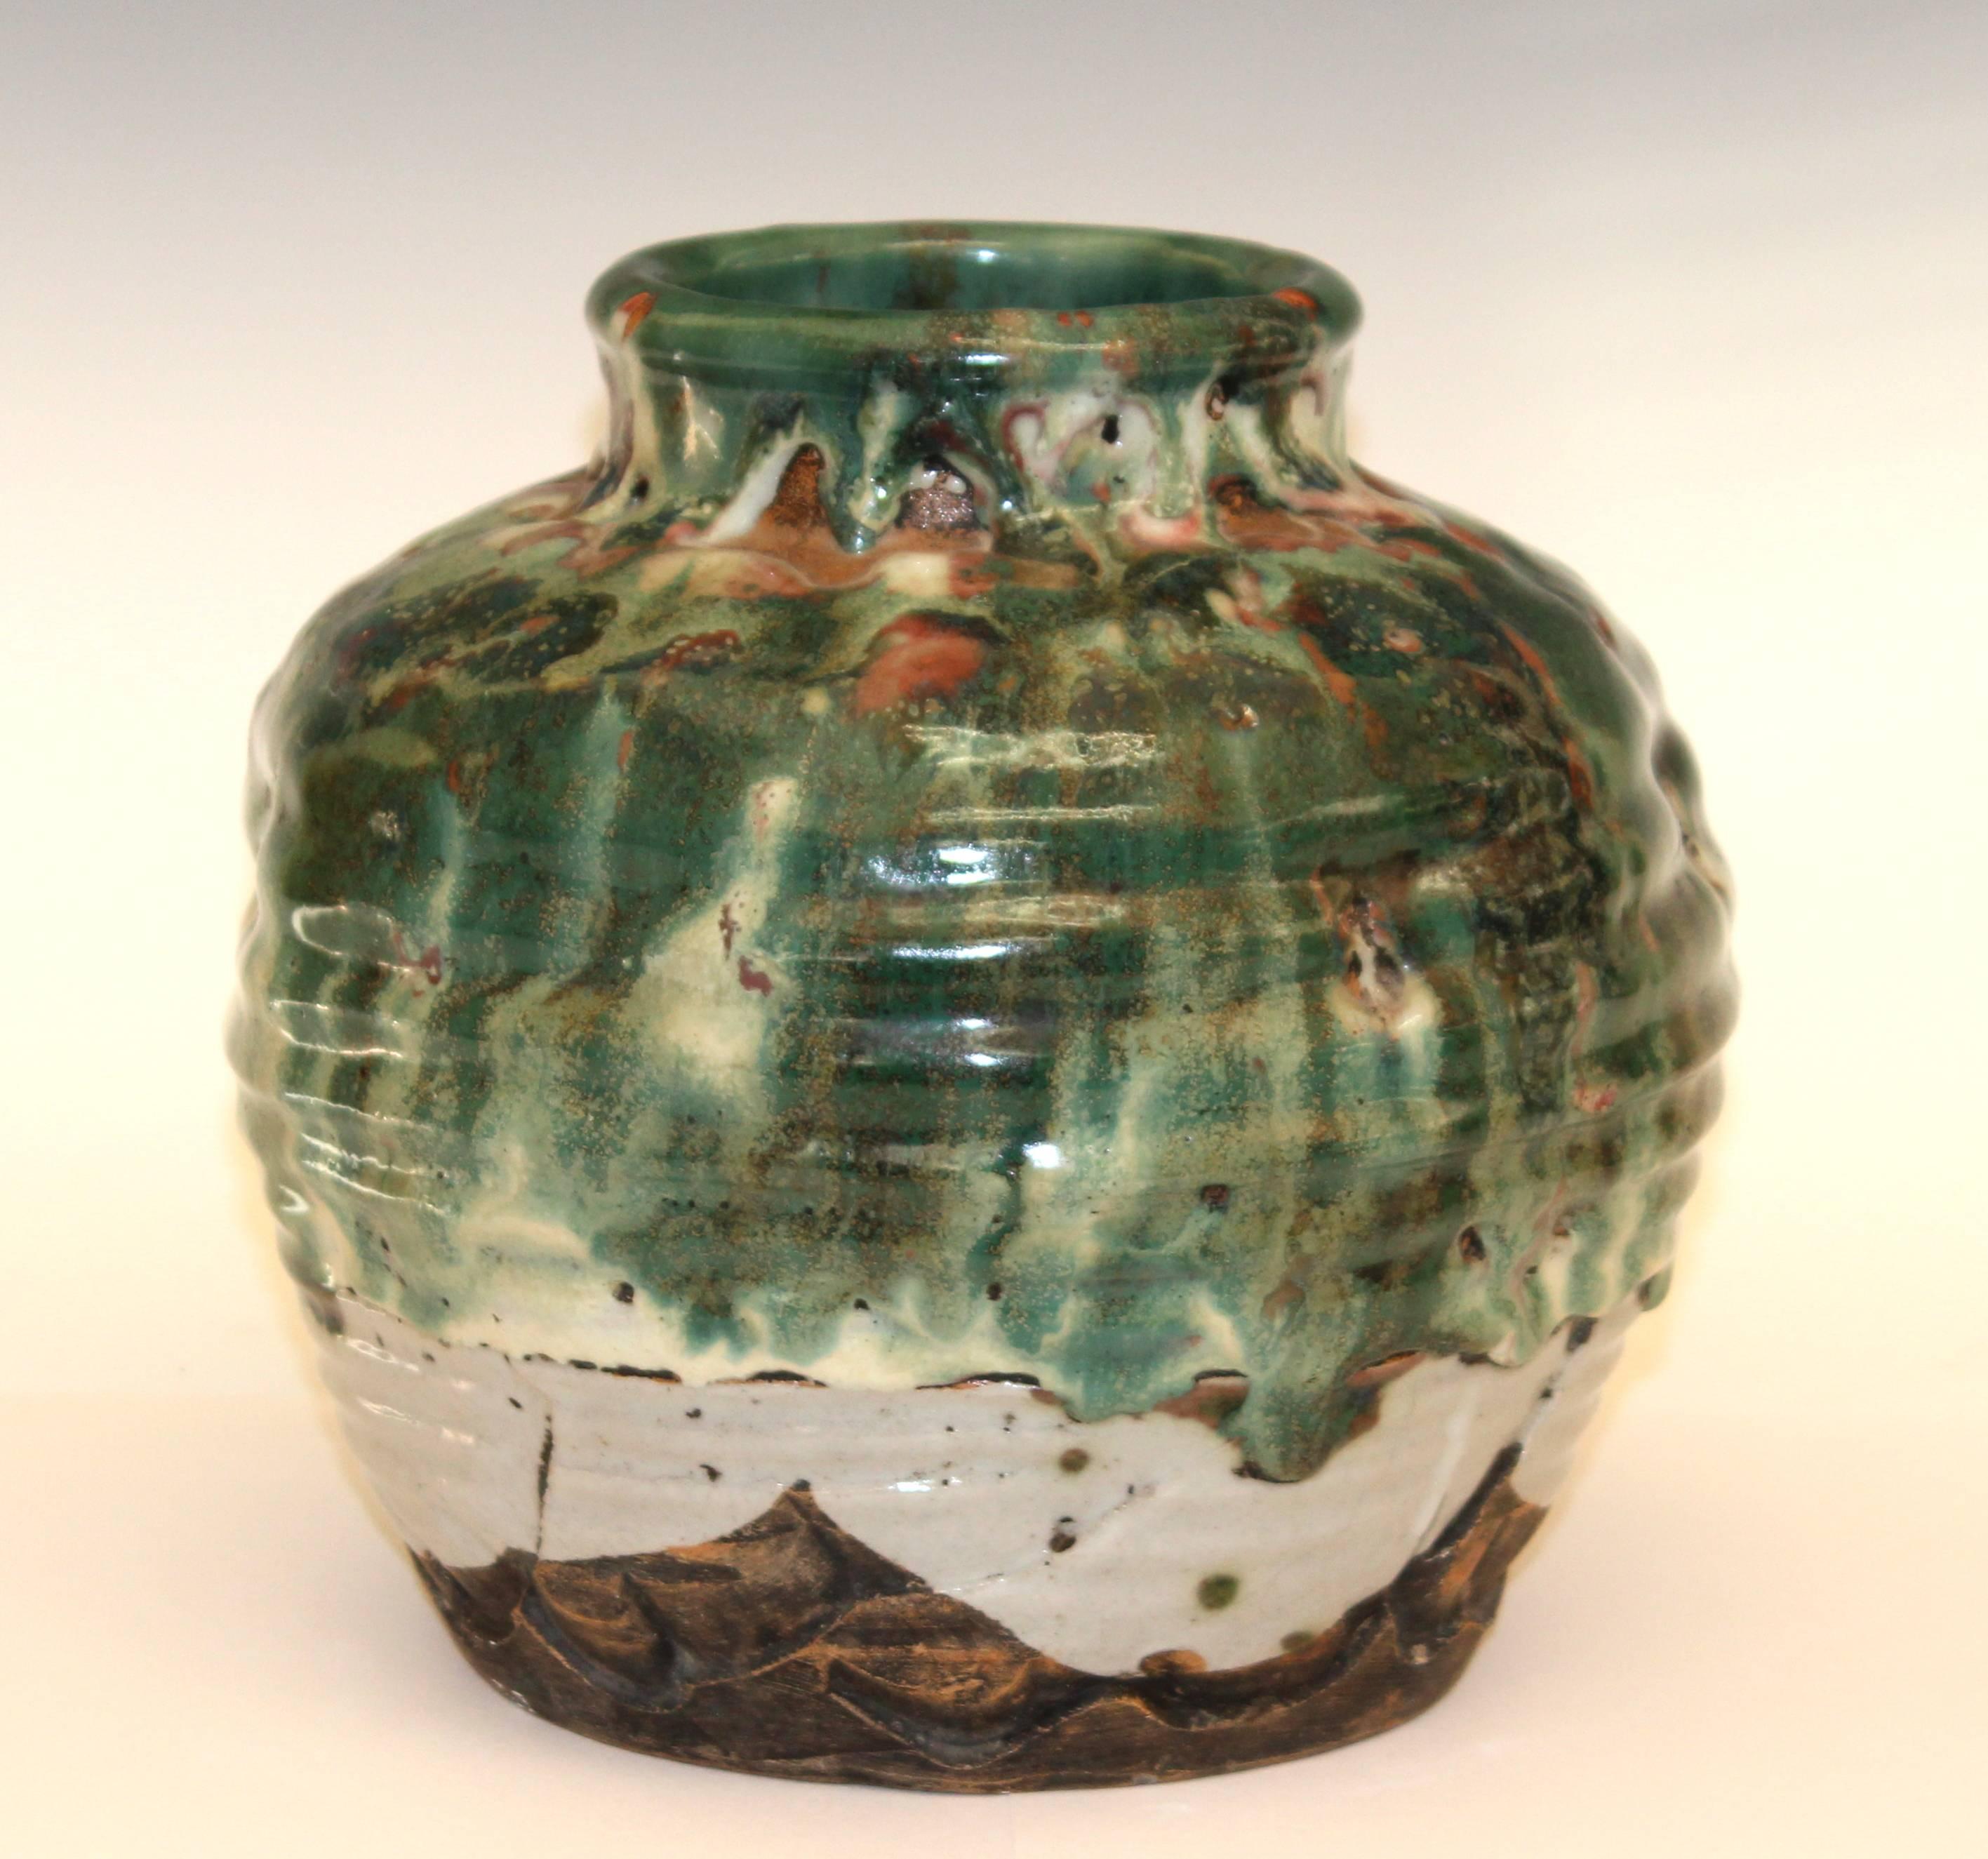 Large Awaji stoneware vase, gouged and dented, with heavy multi colored drip glaze, circa 1930. Impressed marks. 8 1/2